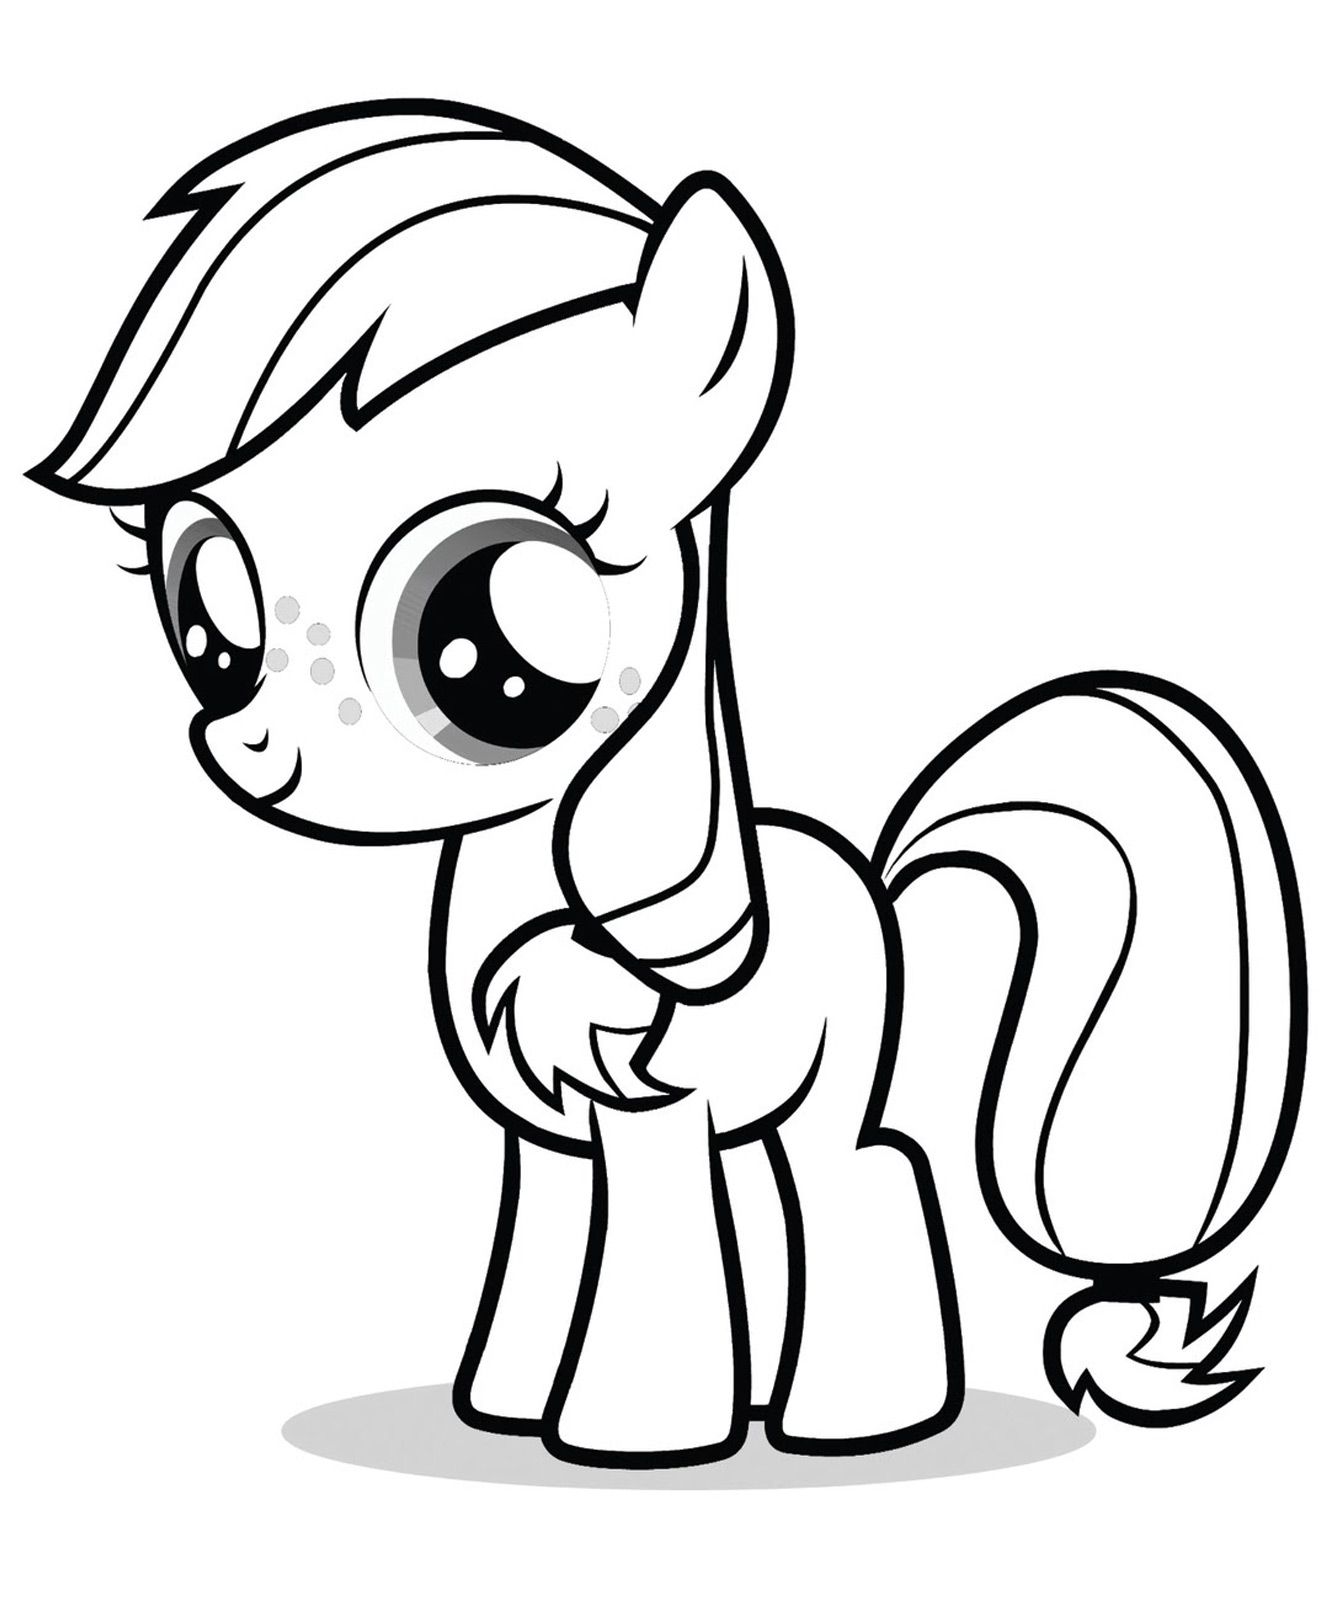 Adorable Pony Coloring Pages - Coloring Pages For All Ages